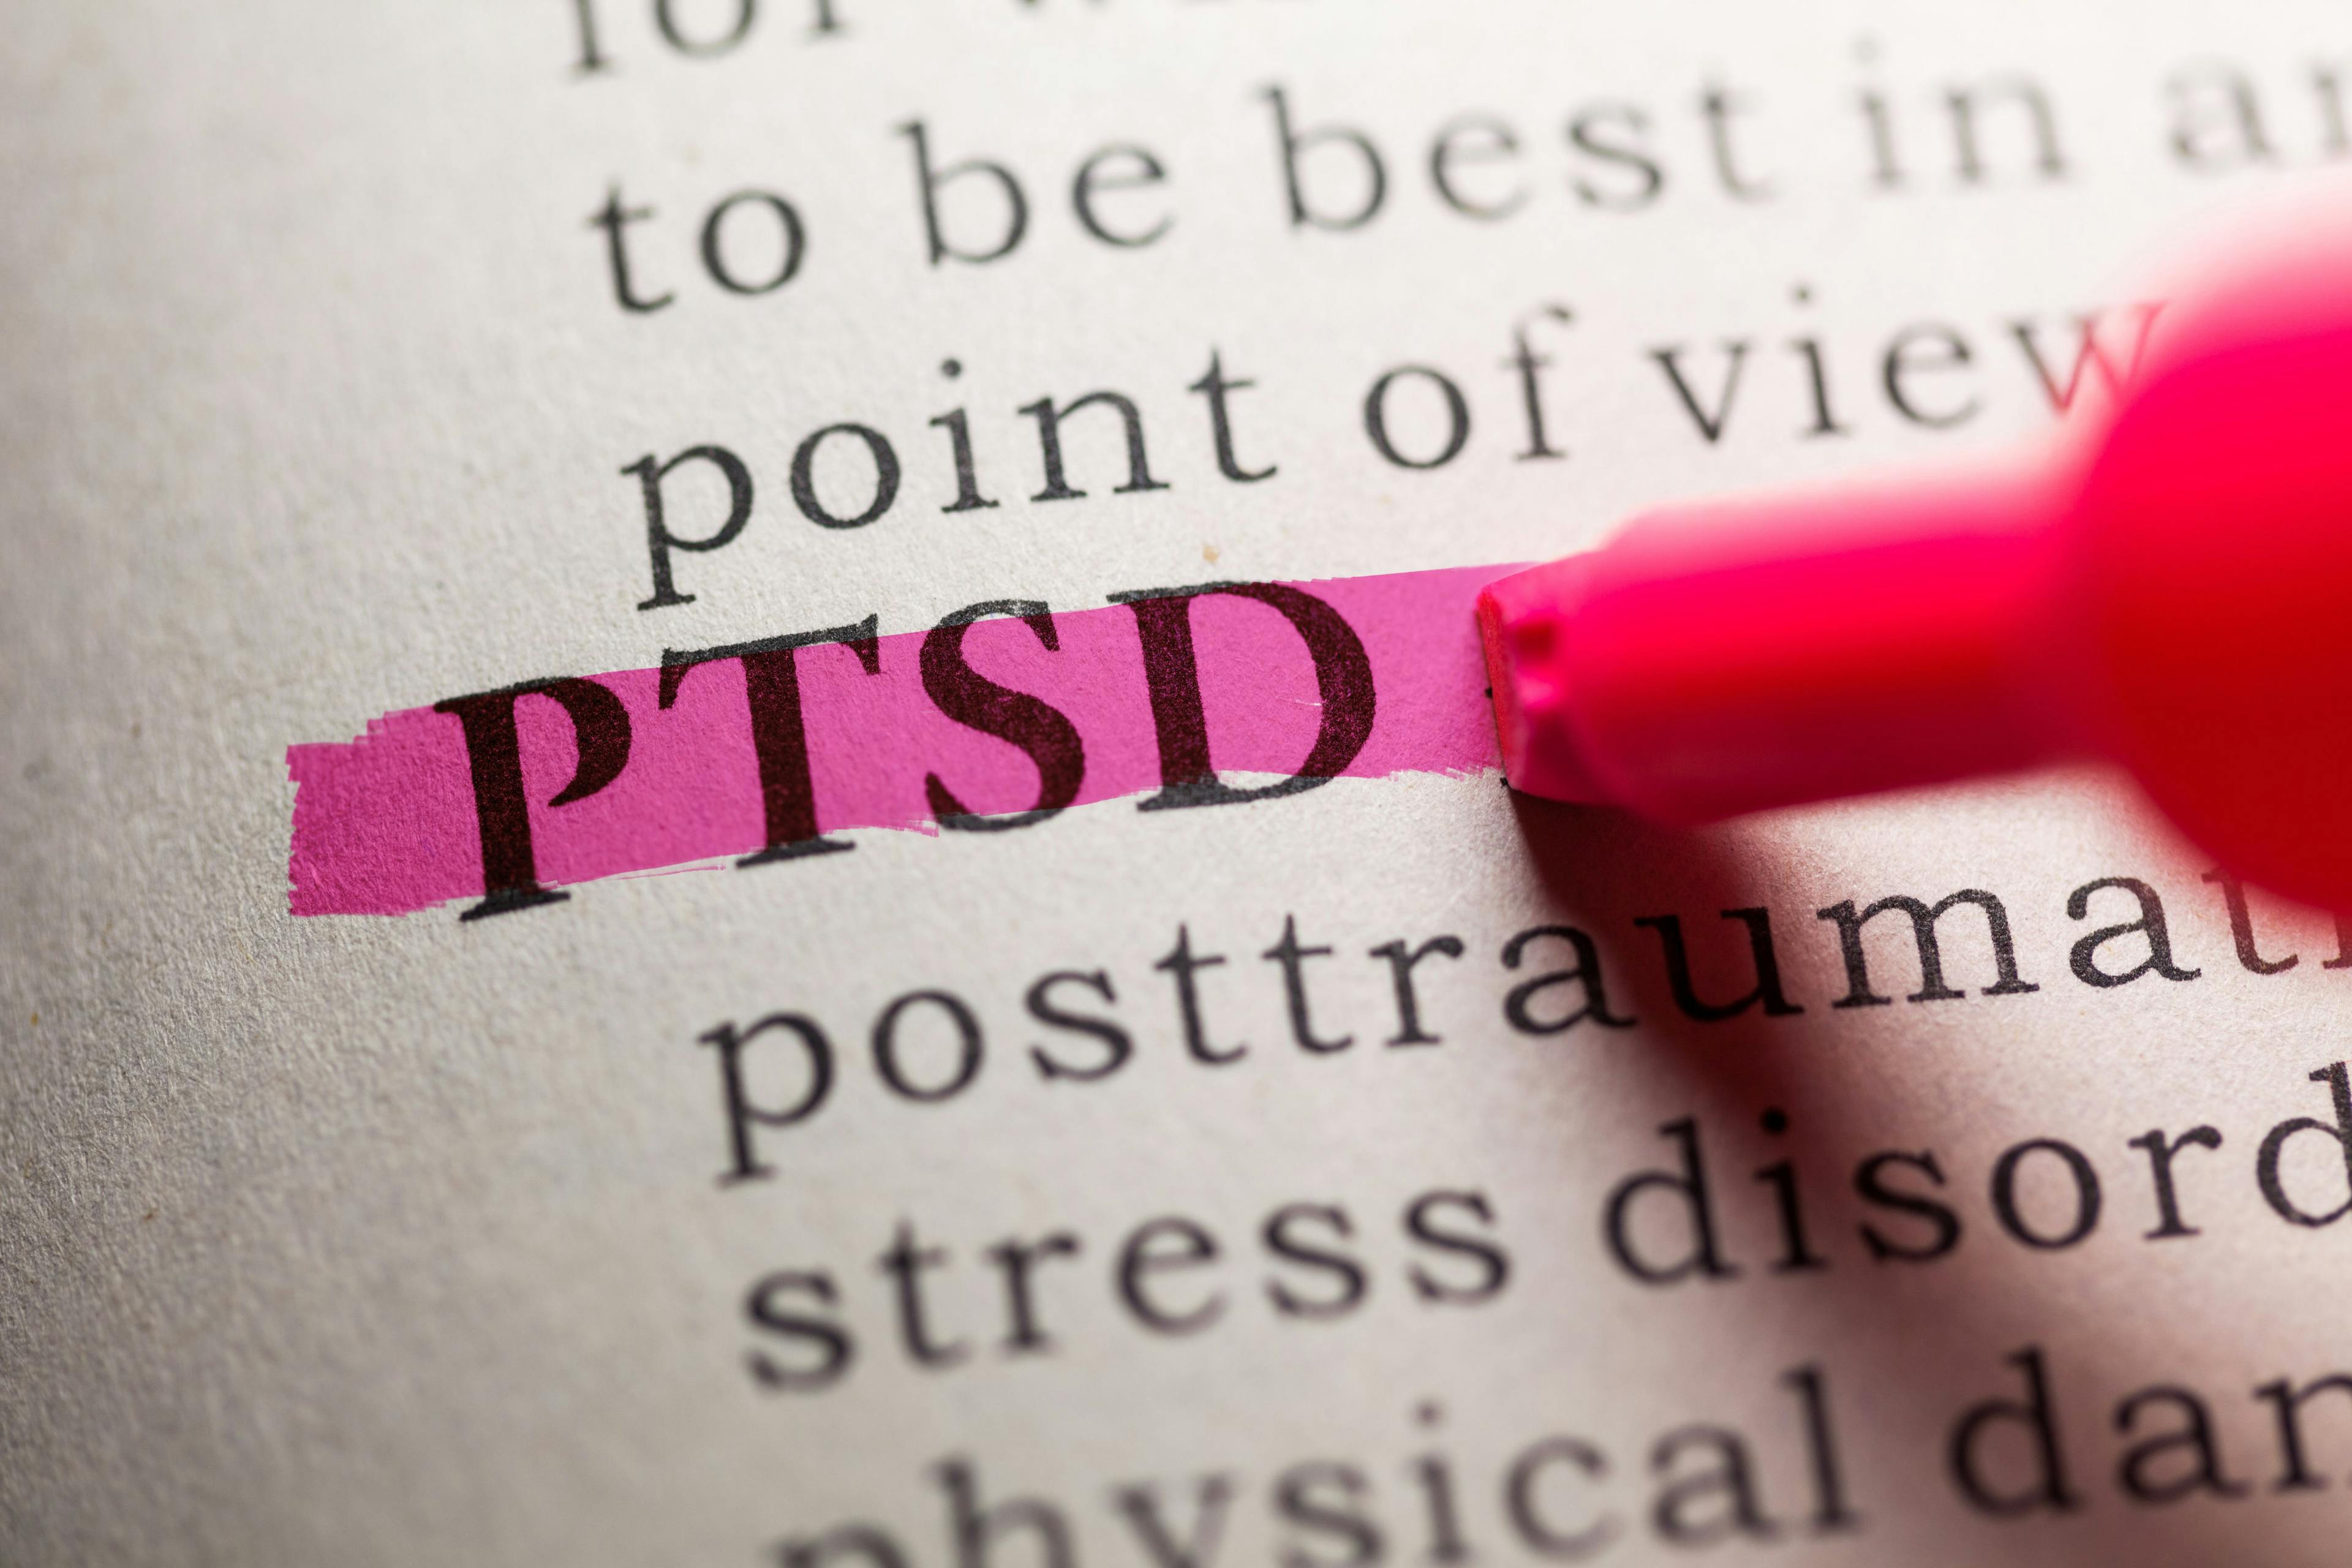 FDA Clears Adjunctive Virtual PTSD Therapy For Market